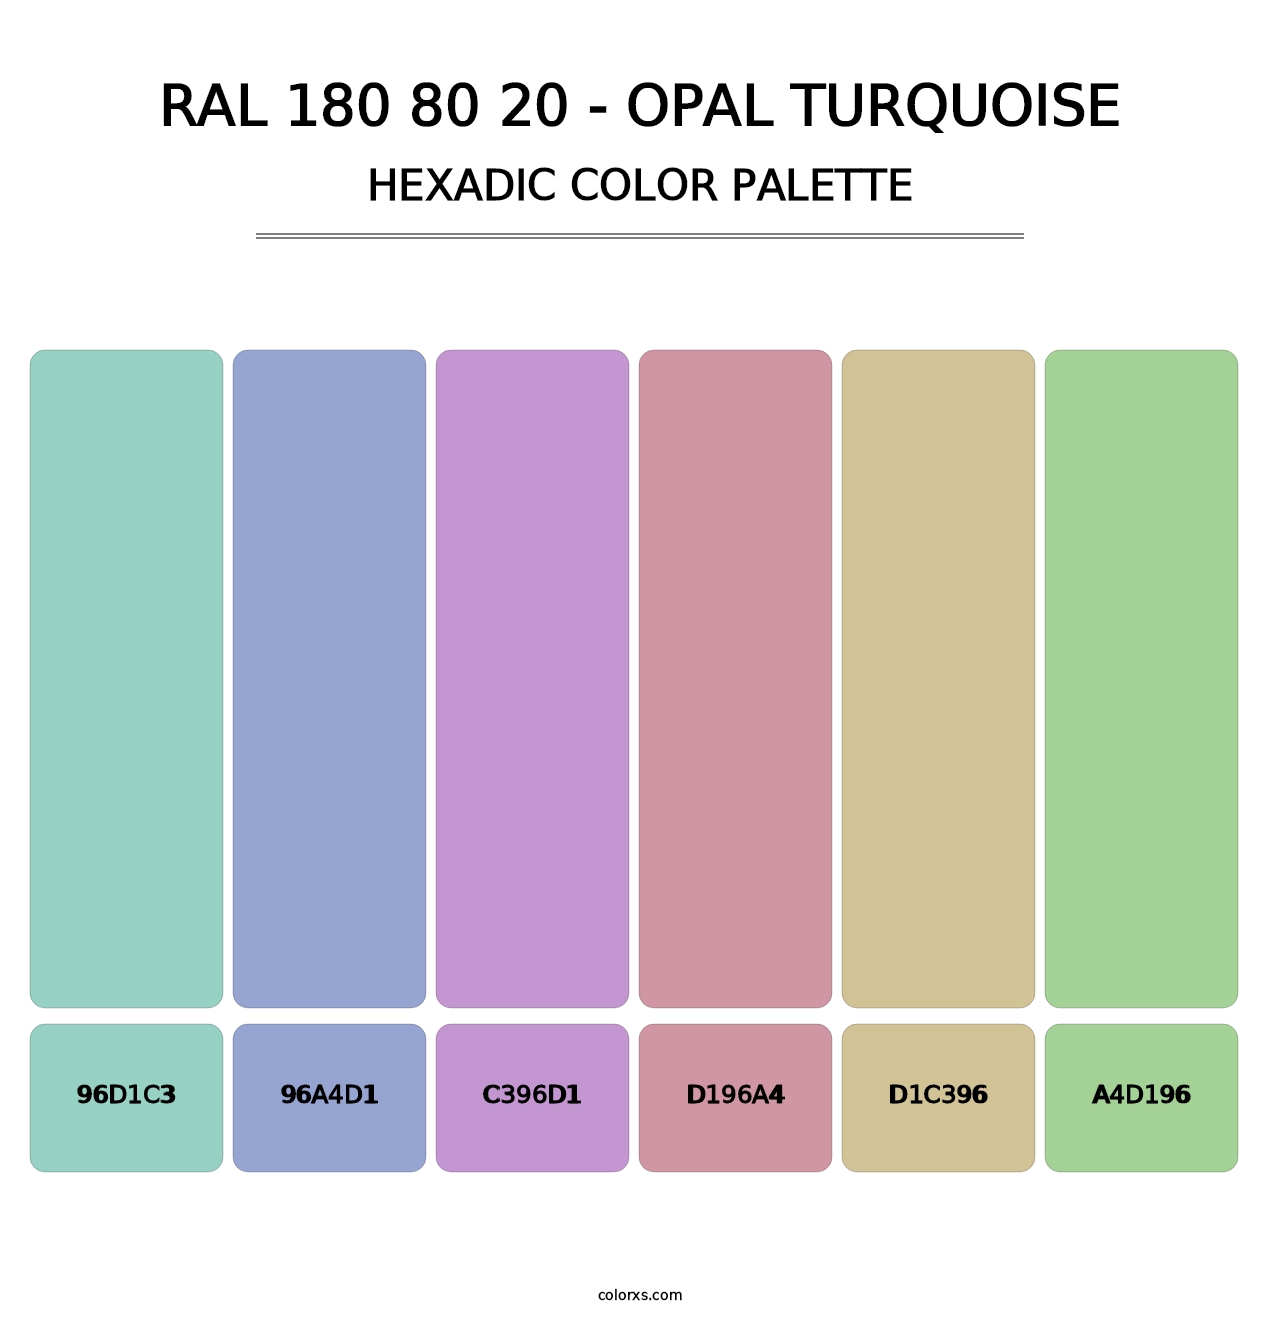 RAL 180 80 20 - Opal Turquoise - Hexadic Color Palette